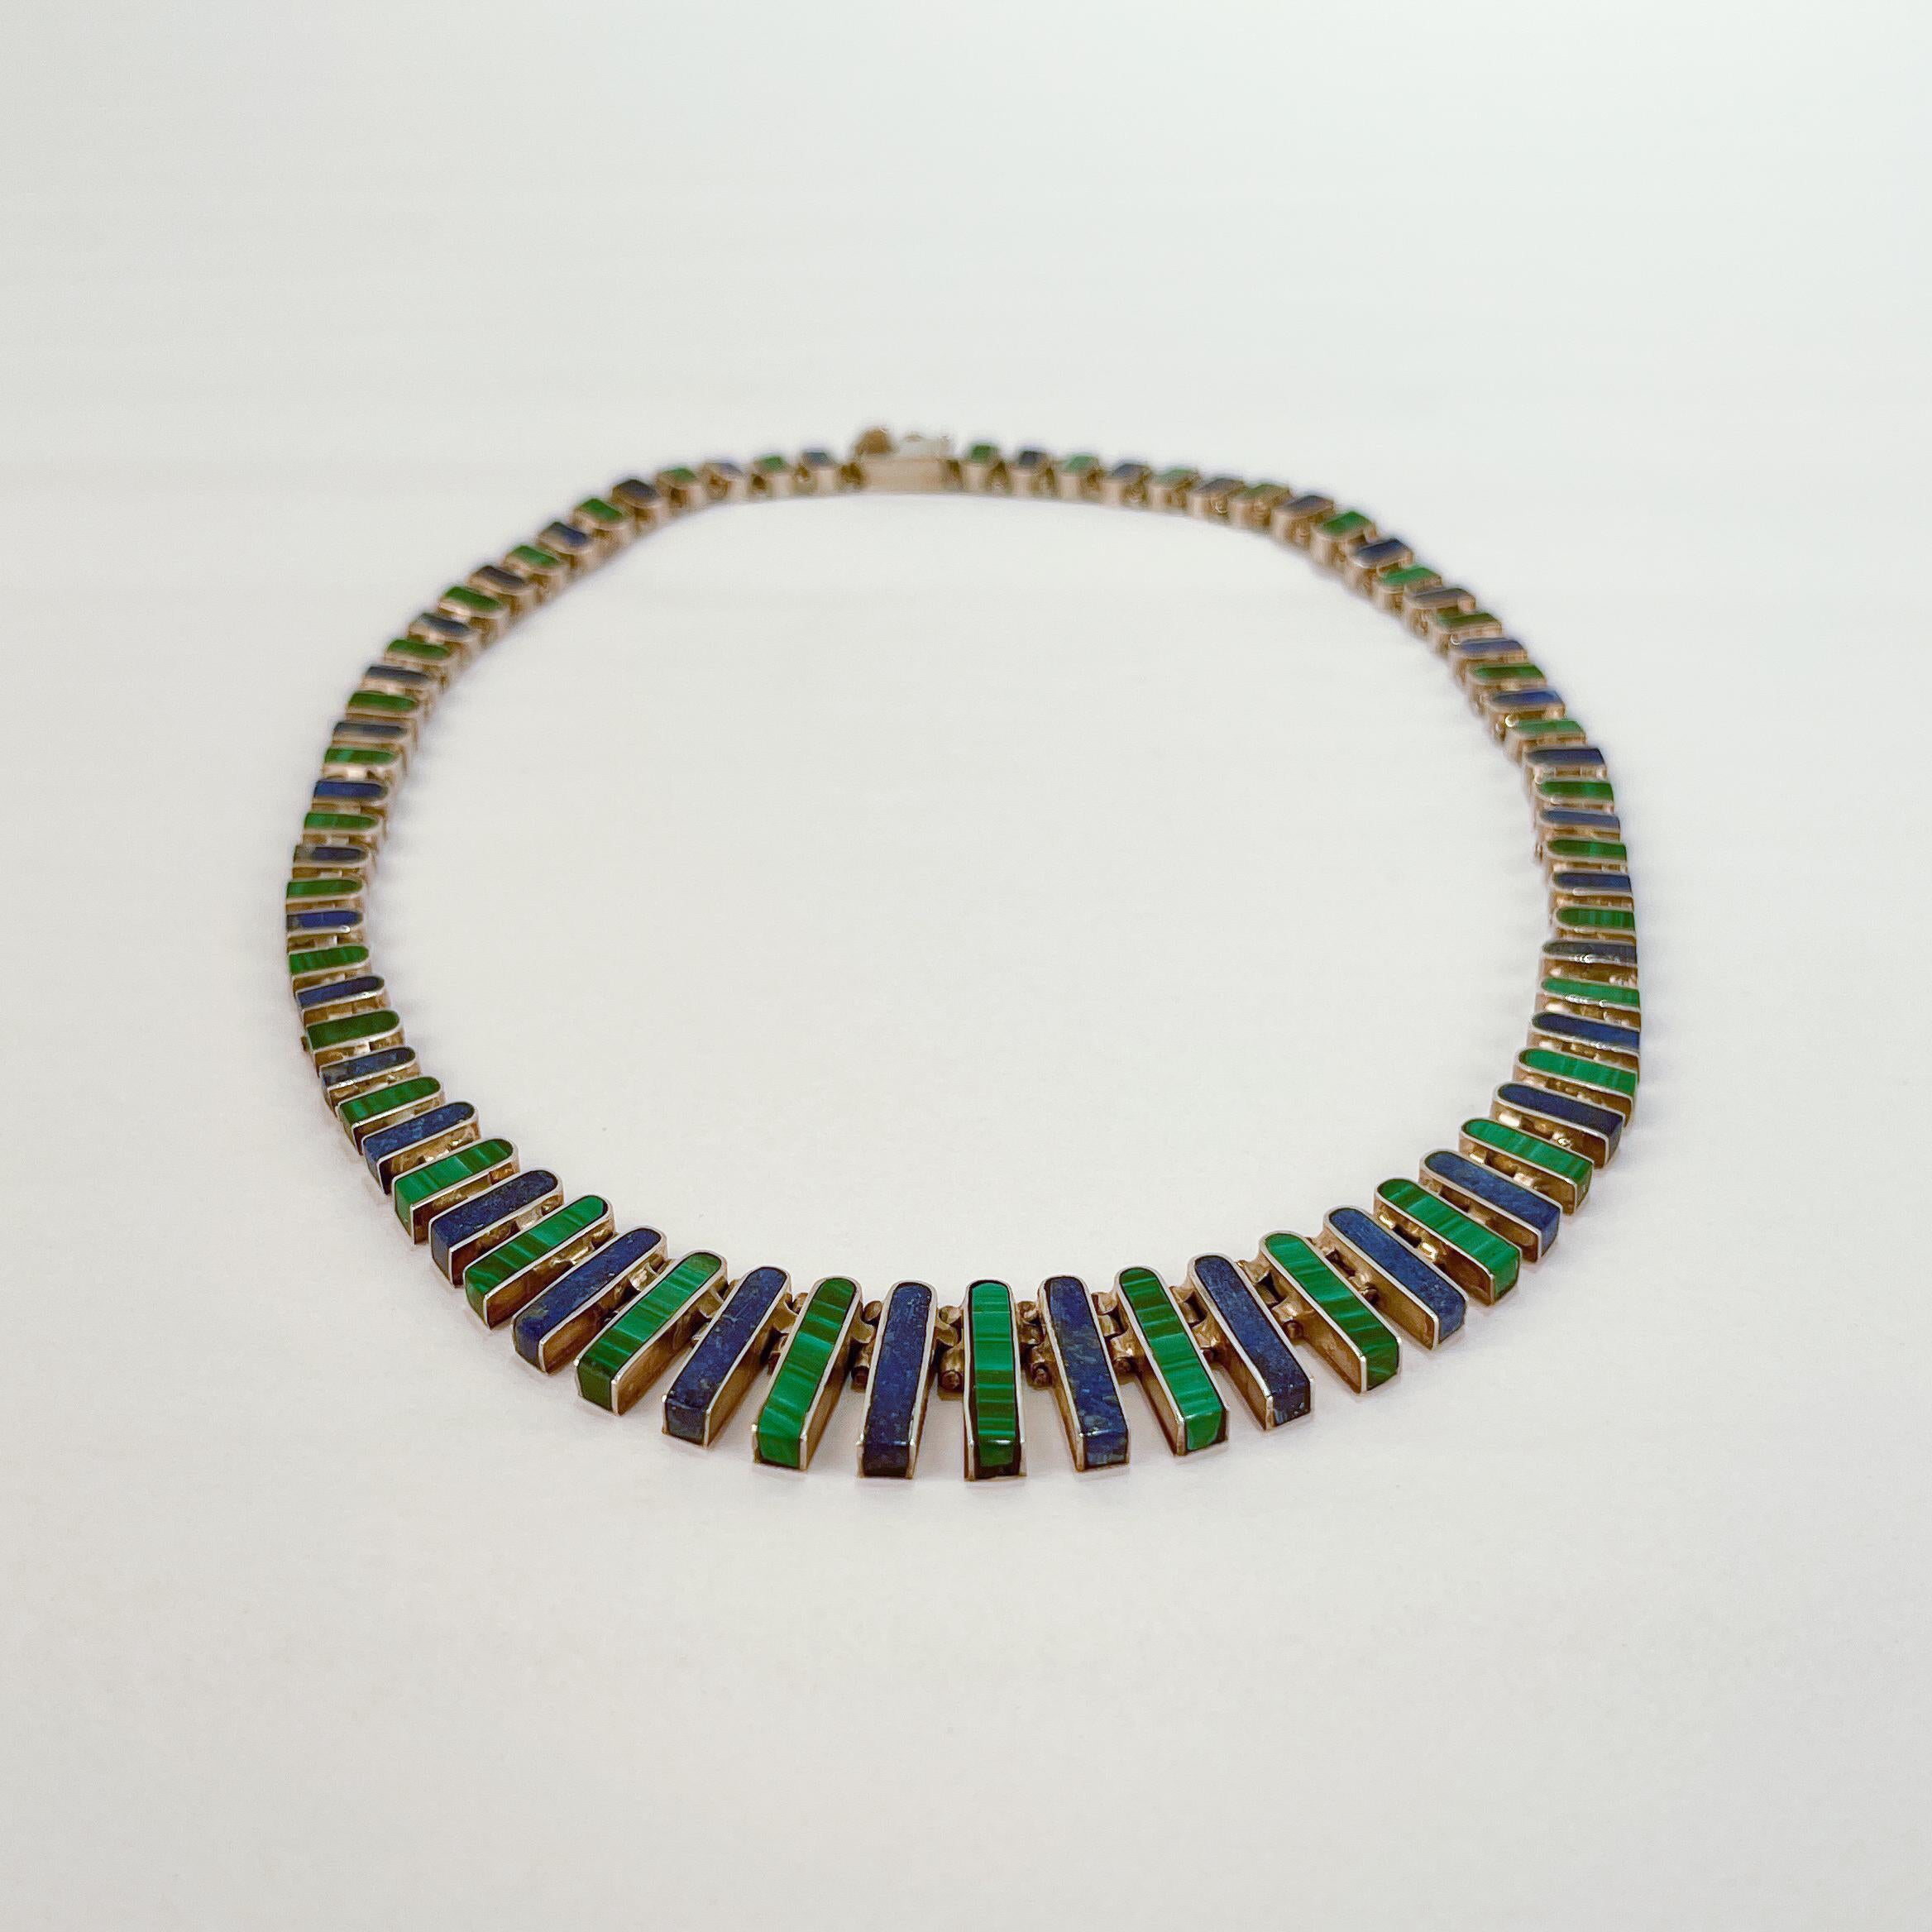 A very fine Mexican sterling silver, malachite, & lapis lazuli graduated opera length necklace.

With graduated sterling silver links set with alternating lapis lazuli and malachite arch-shaped stones.

Simply a wonderful necklace!

Date:
20th